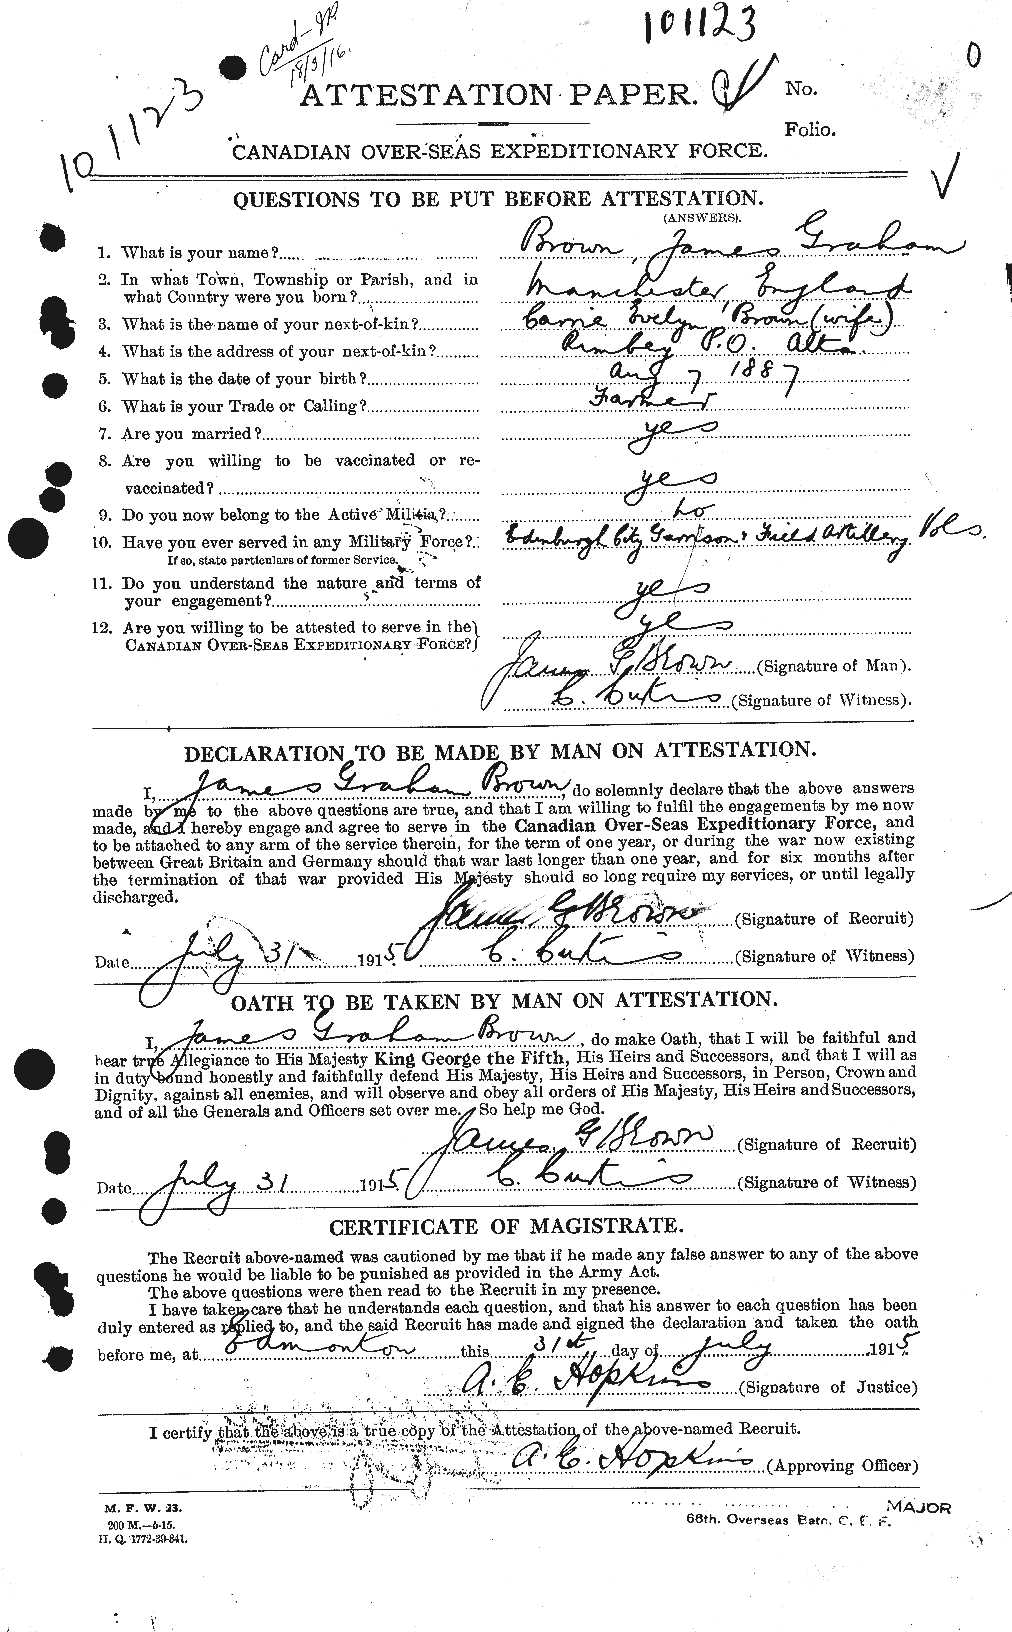 Personnel Records of the First World War - CEF 269538a